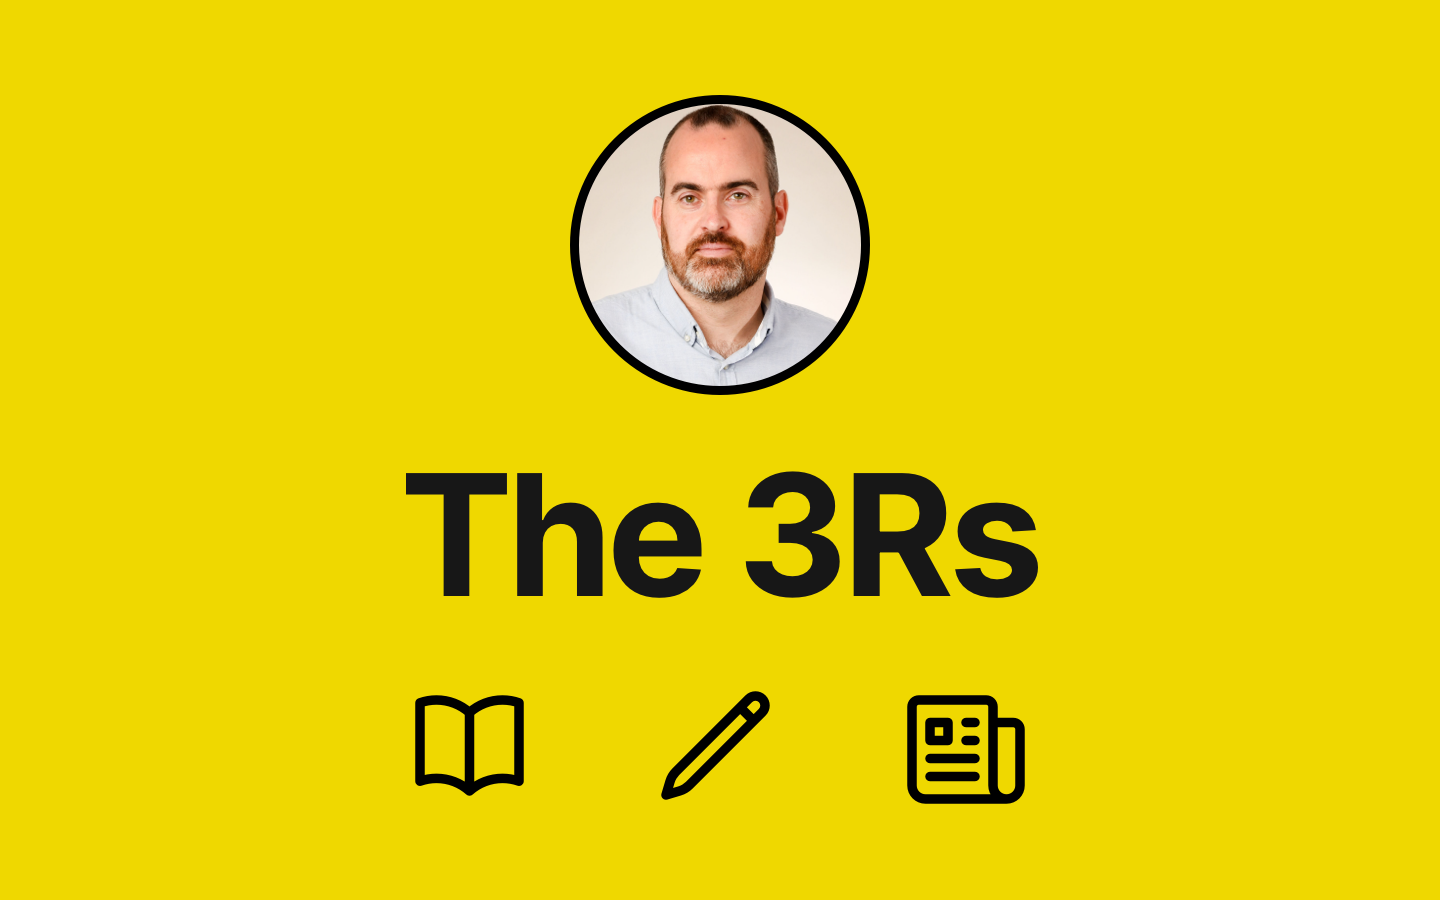 The 3Rs: What I'm reading, (w)riting, & the research I'm interested in - Issue #3 feature image